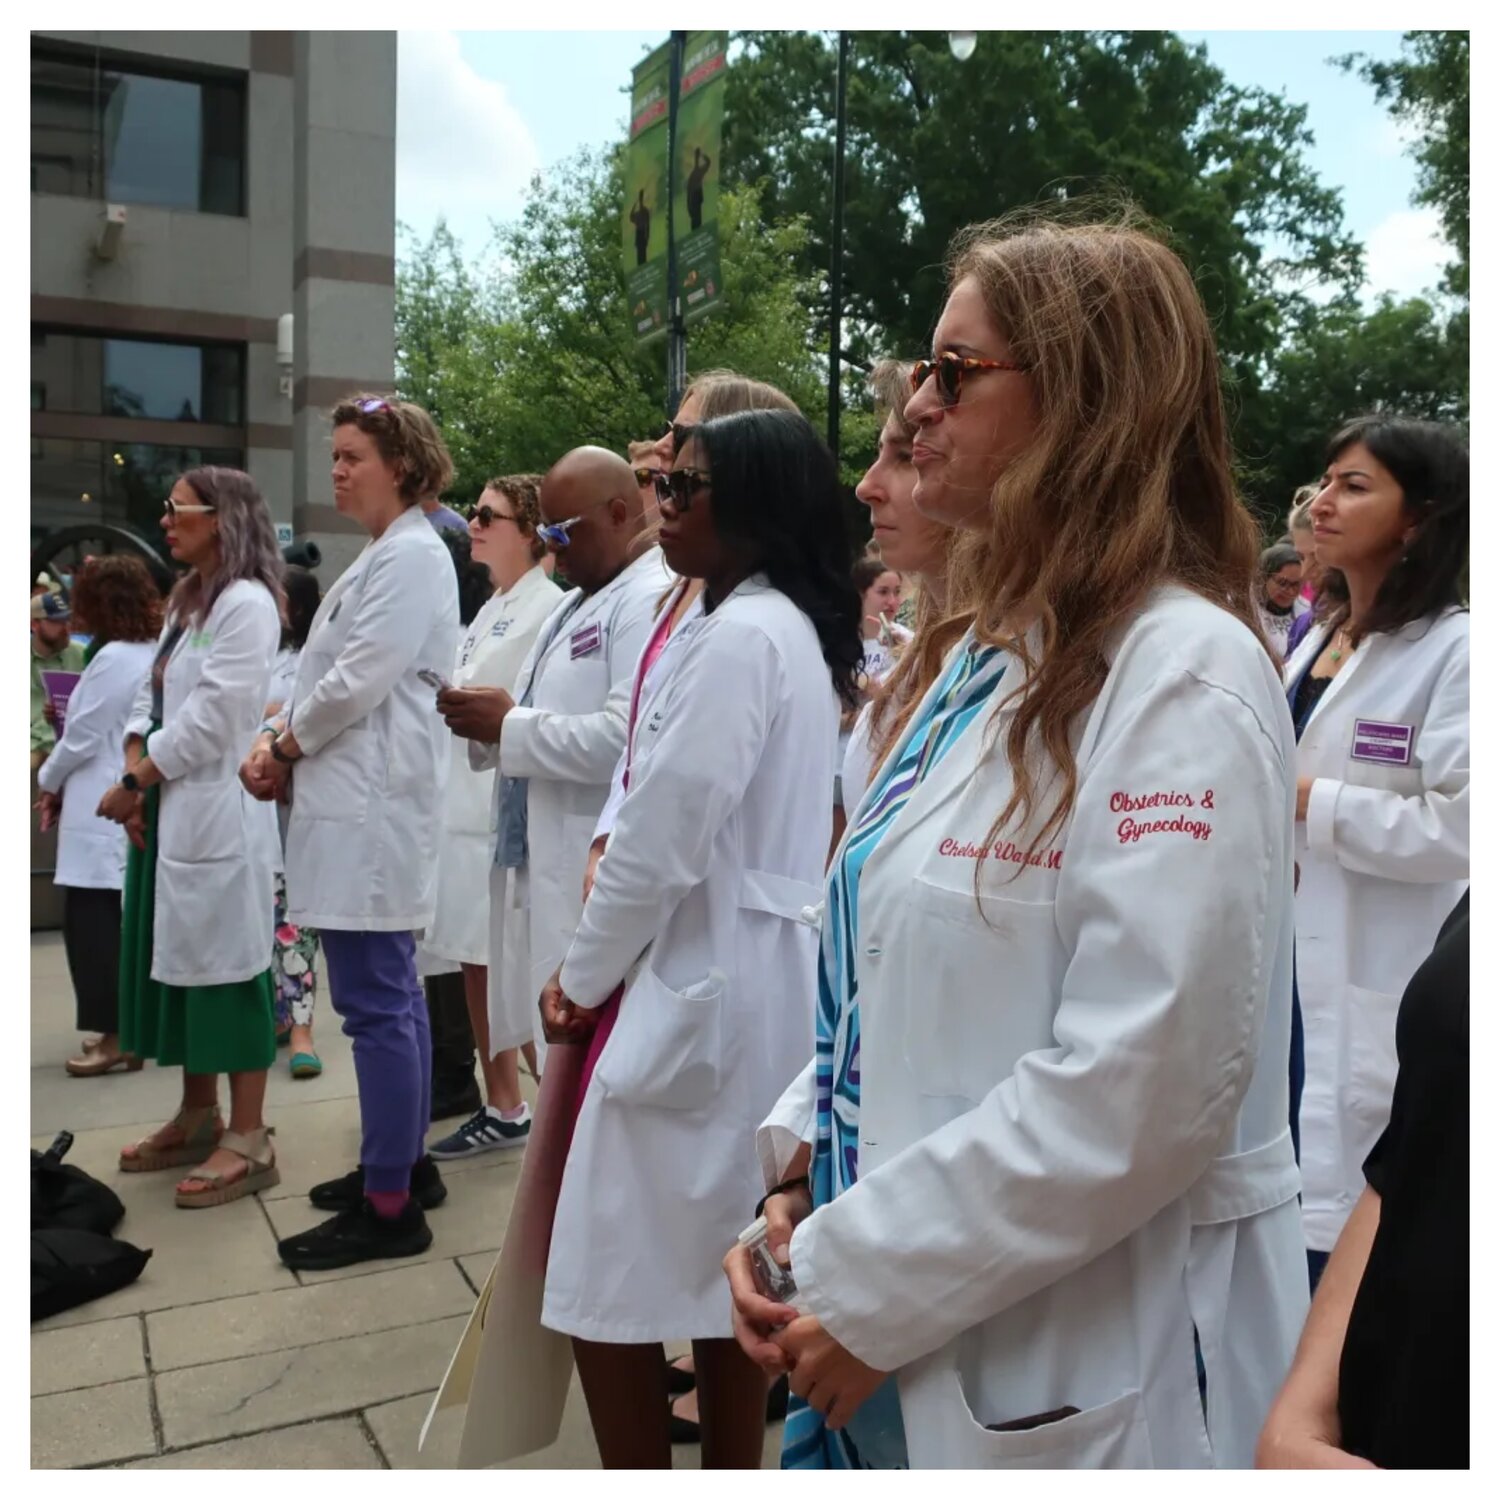 On short notice, hundreds of abortion rights advocates showed up at the state Capitol on May 3. They filled Bicentennial Plaza, across from the legislative building, to participate in an afternoon rally organized by Planned Parenthood South Atlantic. 